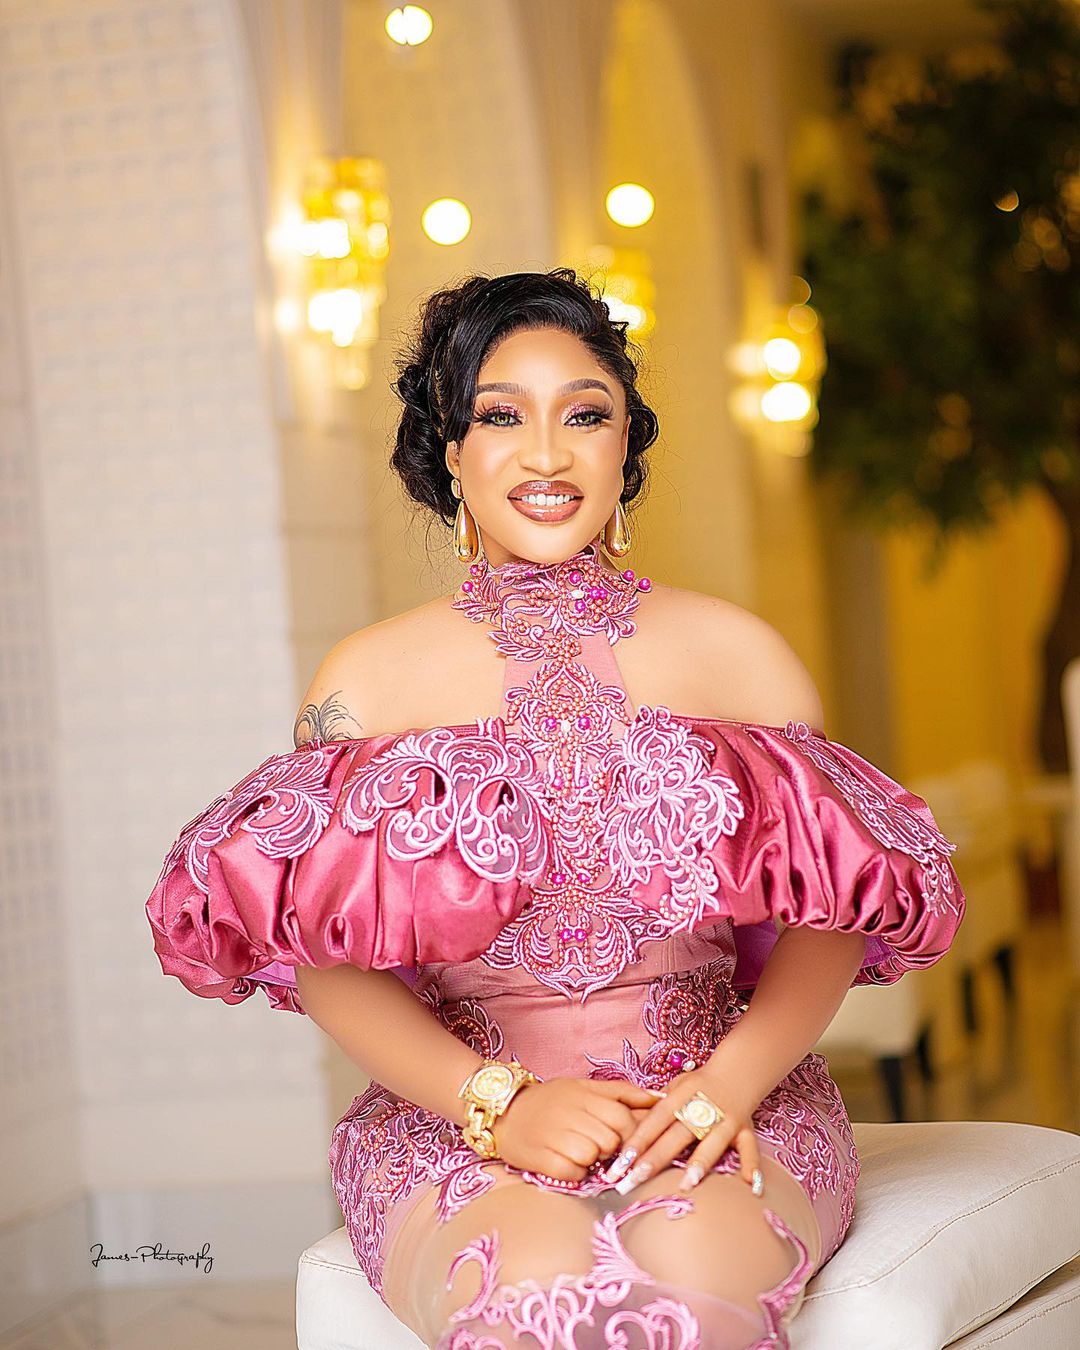 "It's the audacity that I don't get" -- Tonto Dikeh to Sam Larry